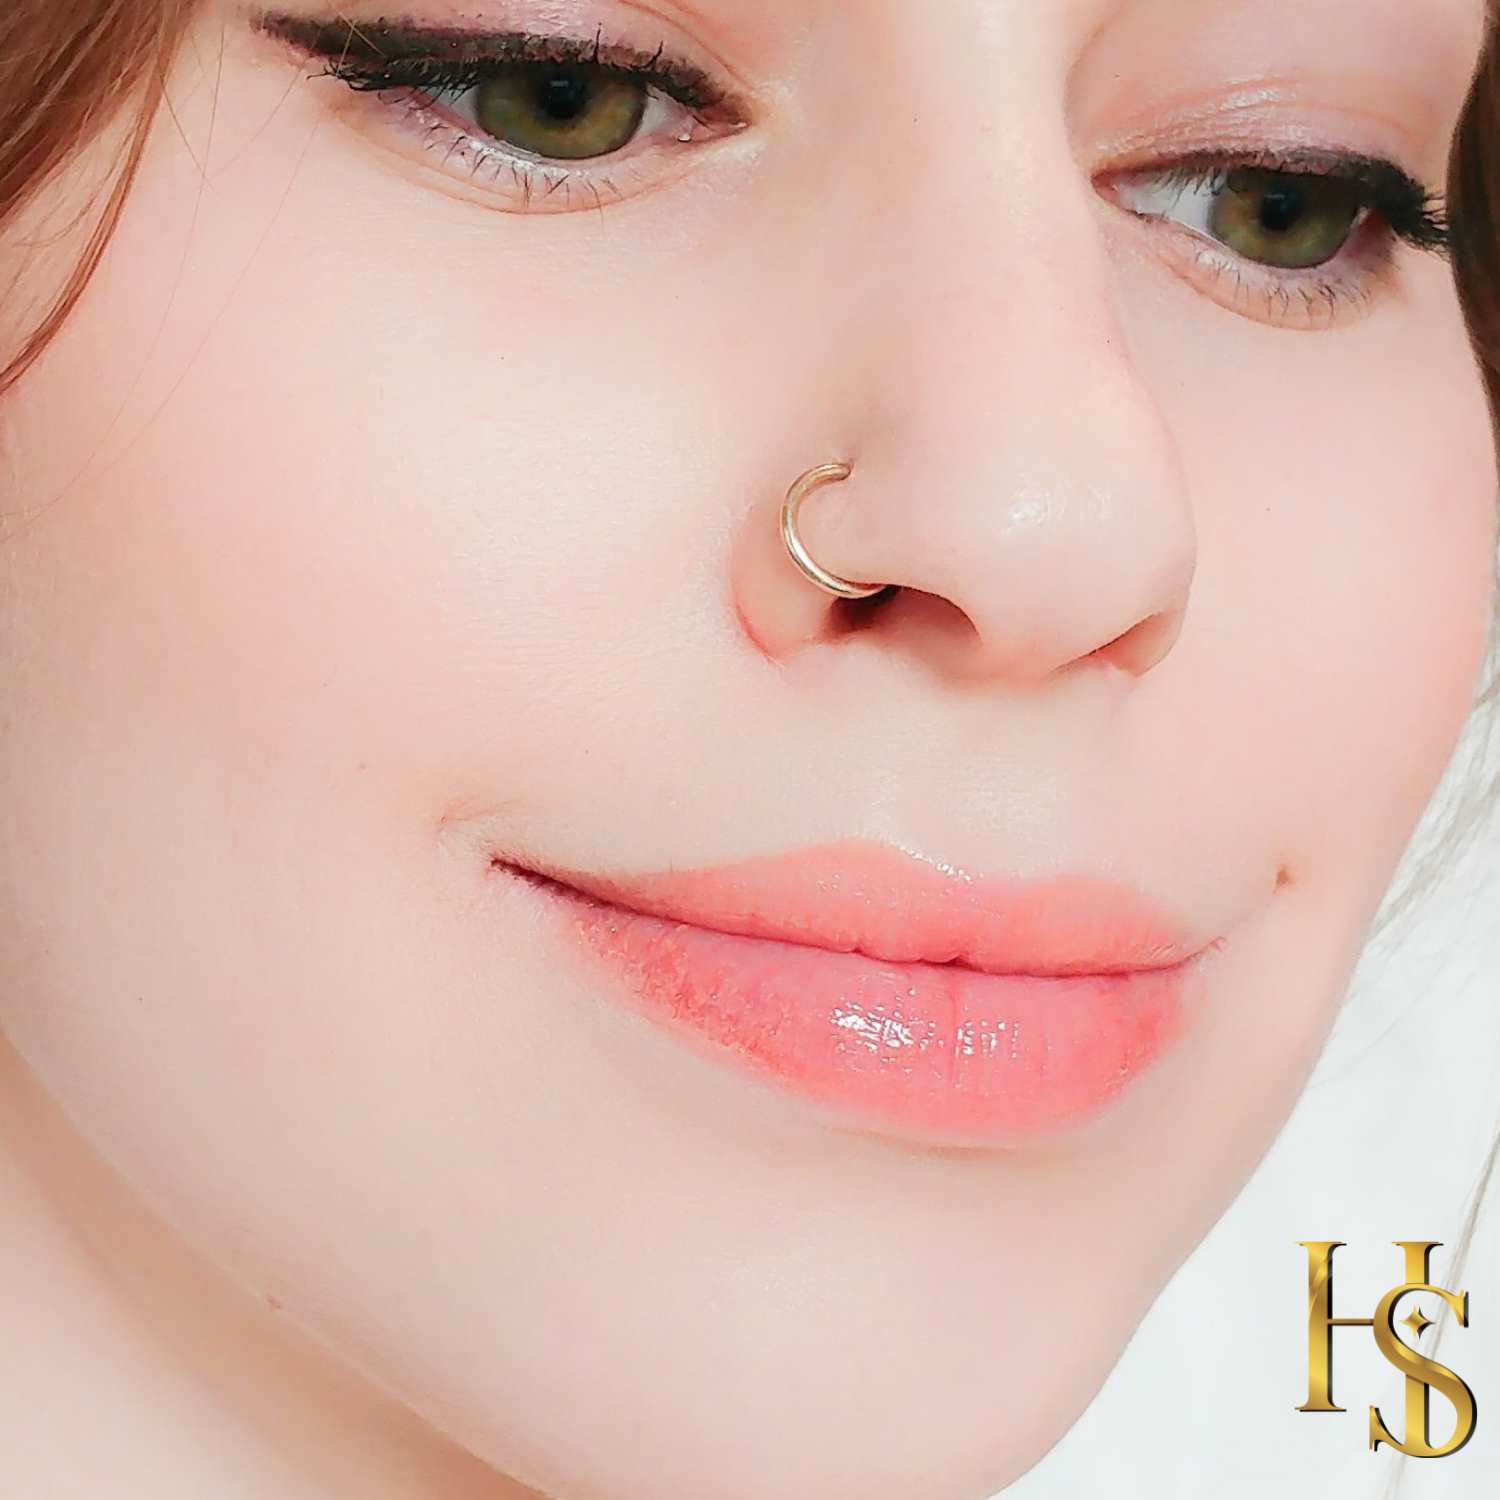 Nose Ring in 92.5 Sterling Silver - 18K Gold finish - Elegant Septum Ring / Nose Pin / Silver Nath